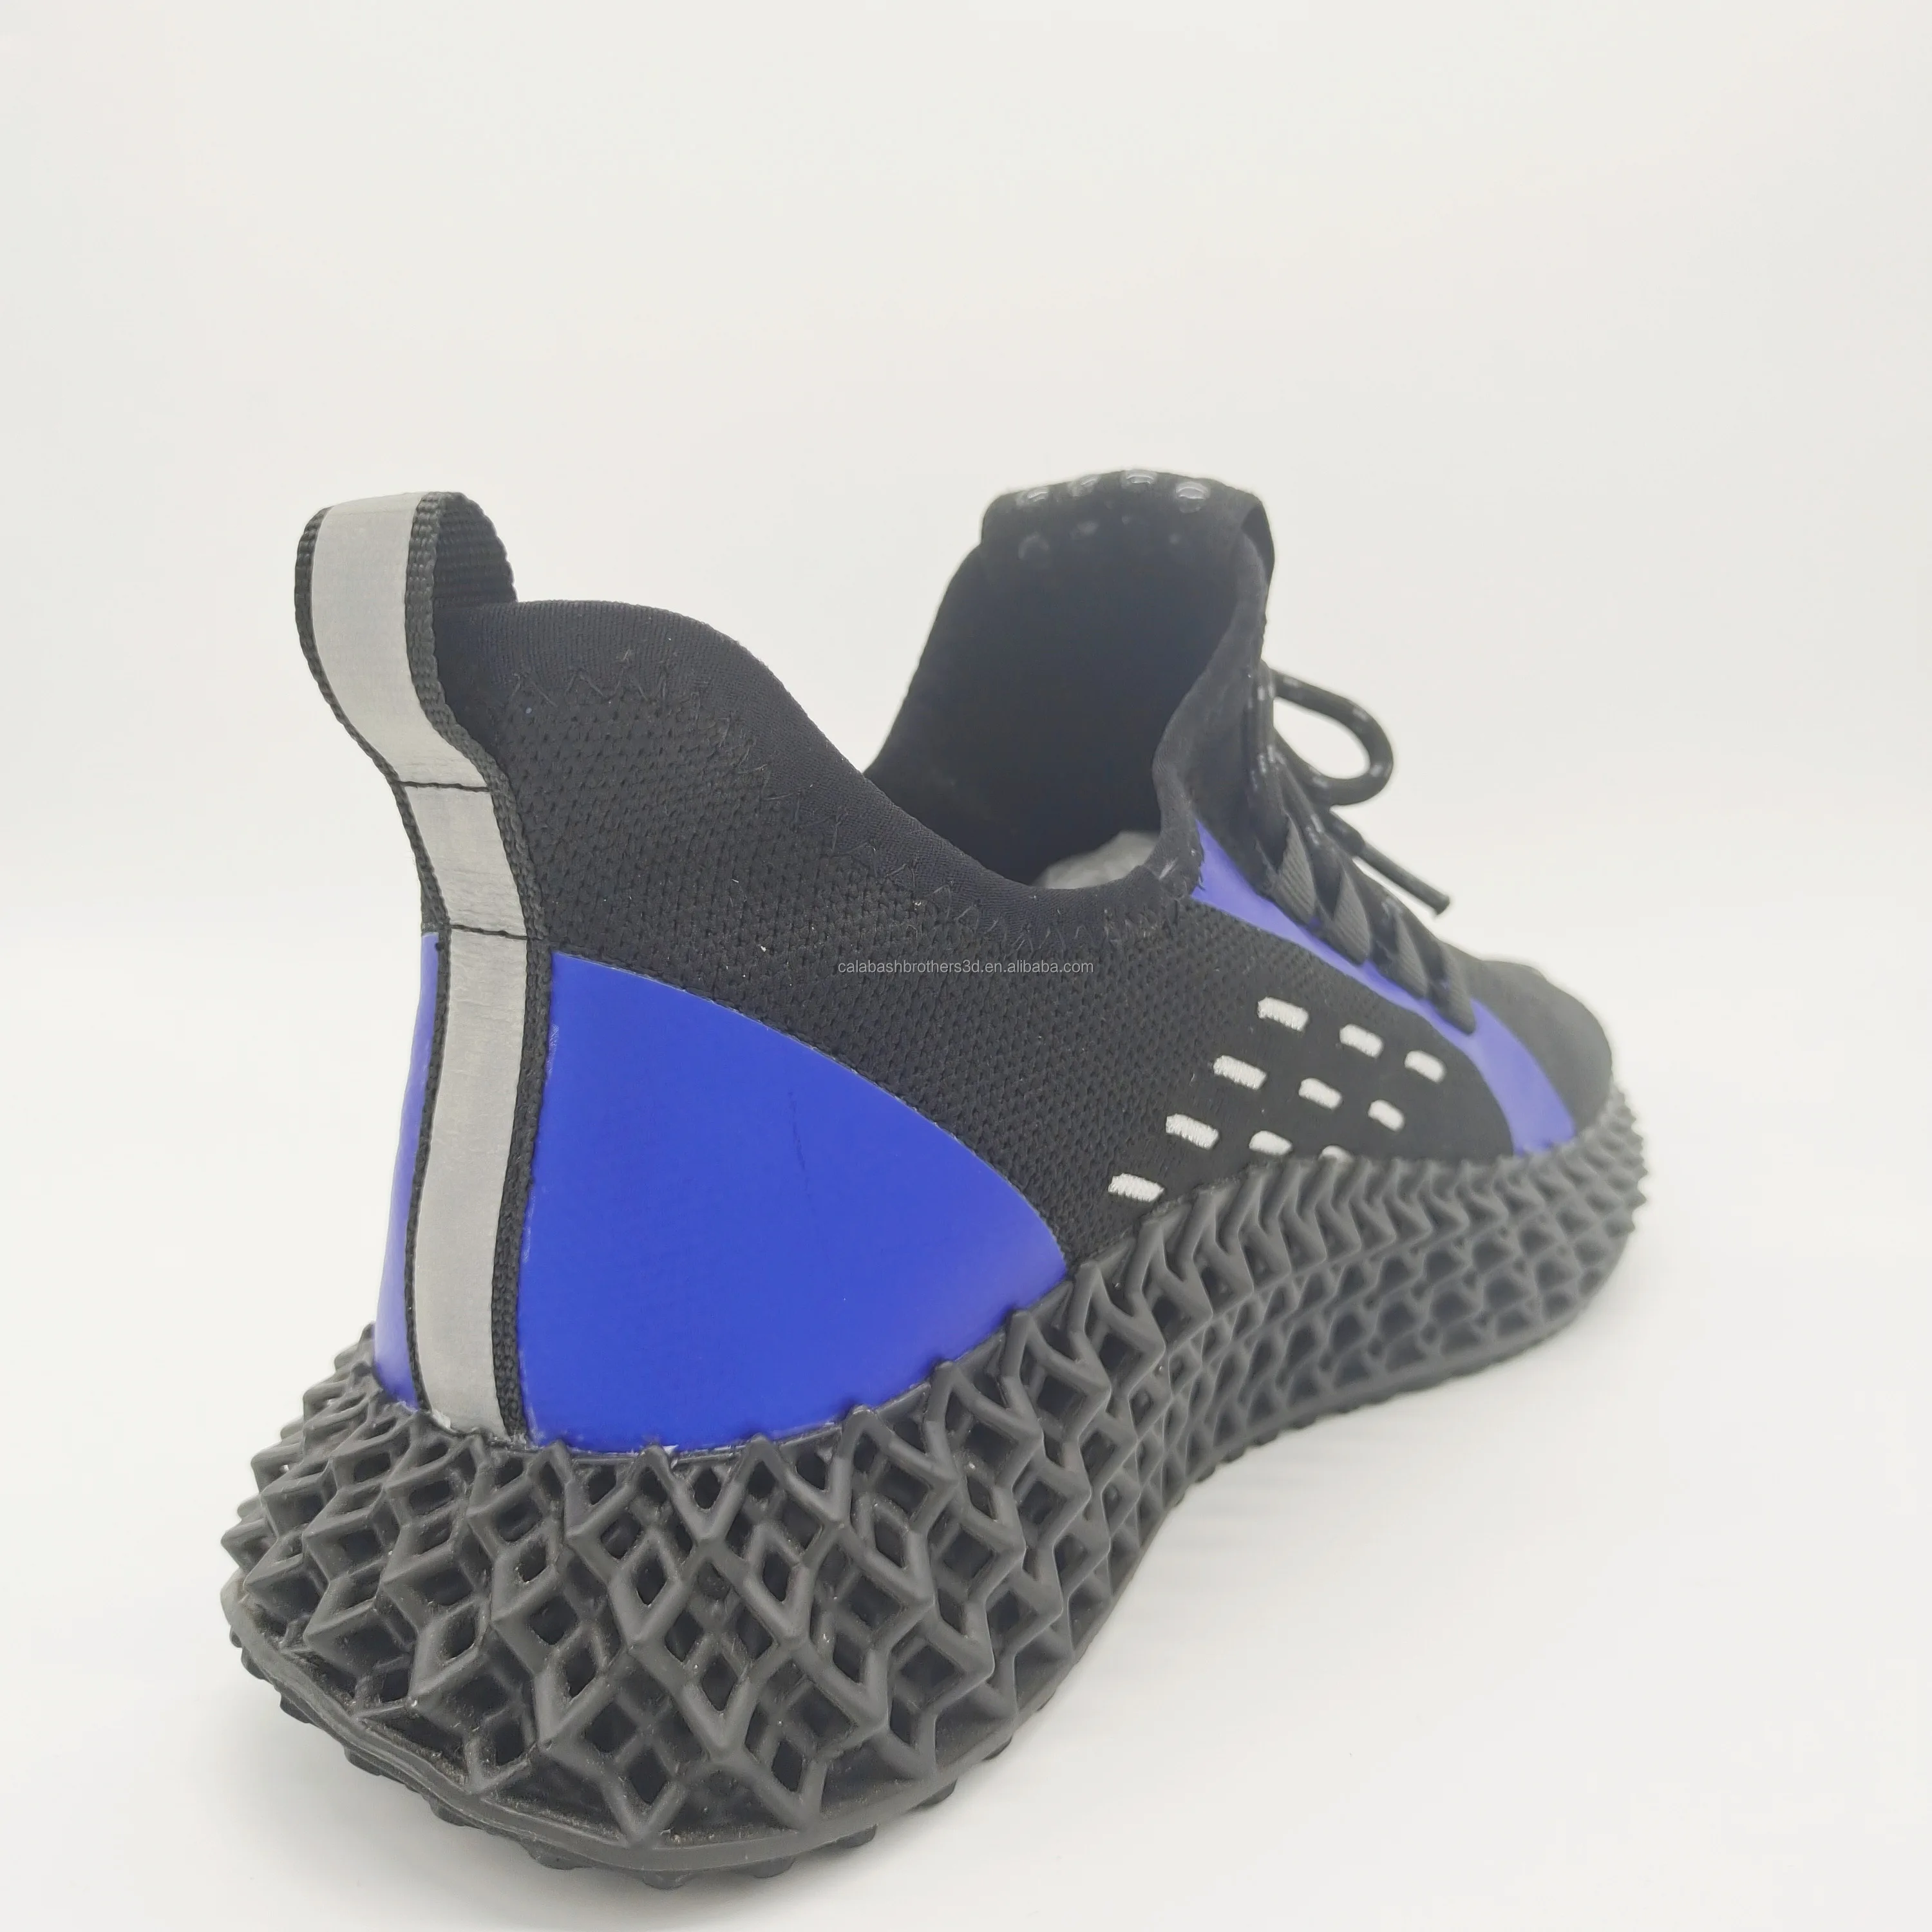 Newest High Elastic 3D Printed Sneaker TPU 3D PRINTED Sole 3D PRINTING insole Shoes for casual sneaker